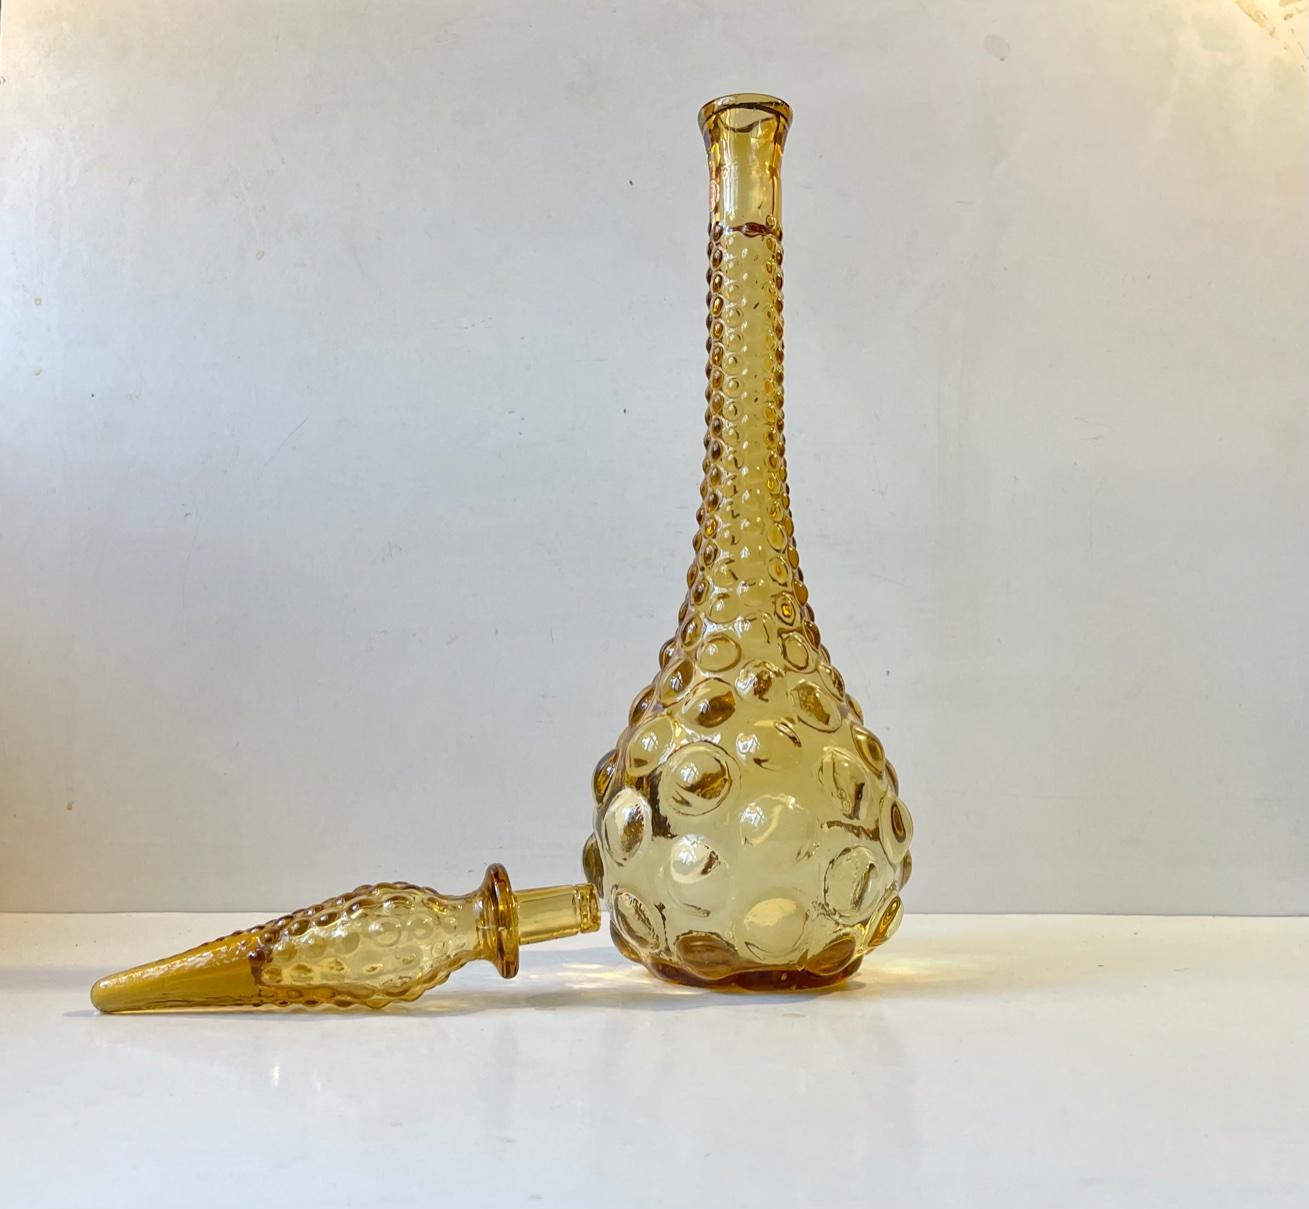 Ochre yellow glass decanter budding decor in relief. Designed and manufactured by Empoli in Italy during the early 1970s. This decorative decanter can contain between 1-1.5 liter spirits or water. Original made in Italy sticker from Empoli still